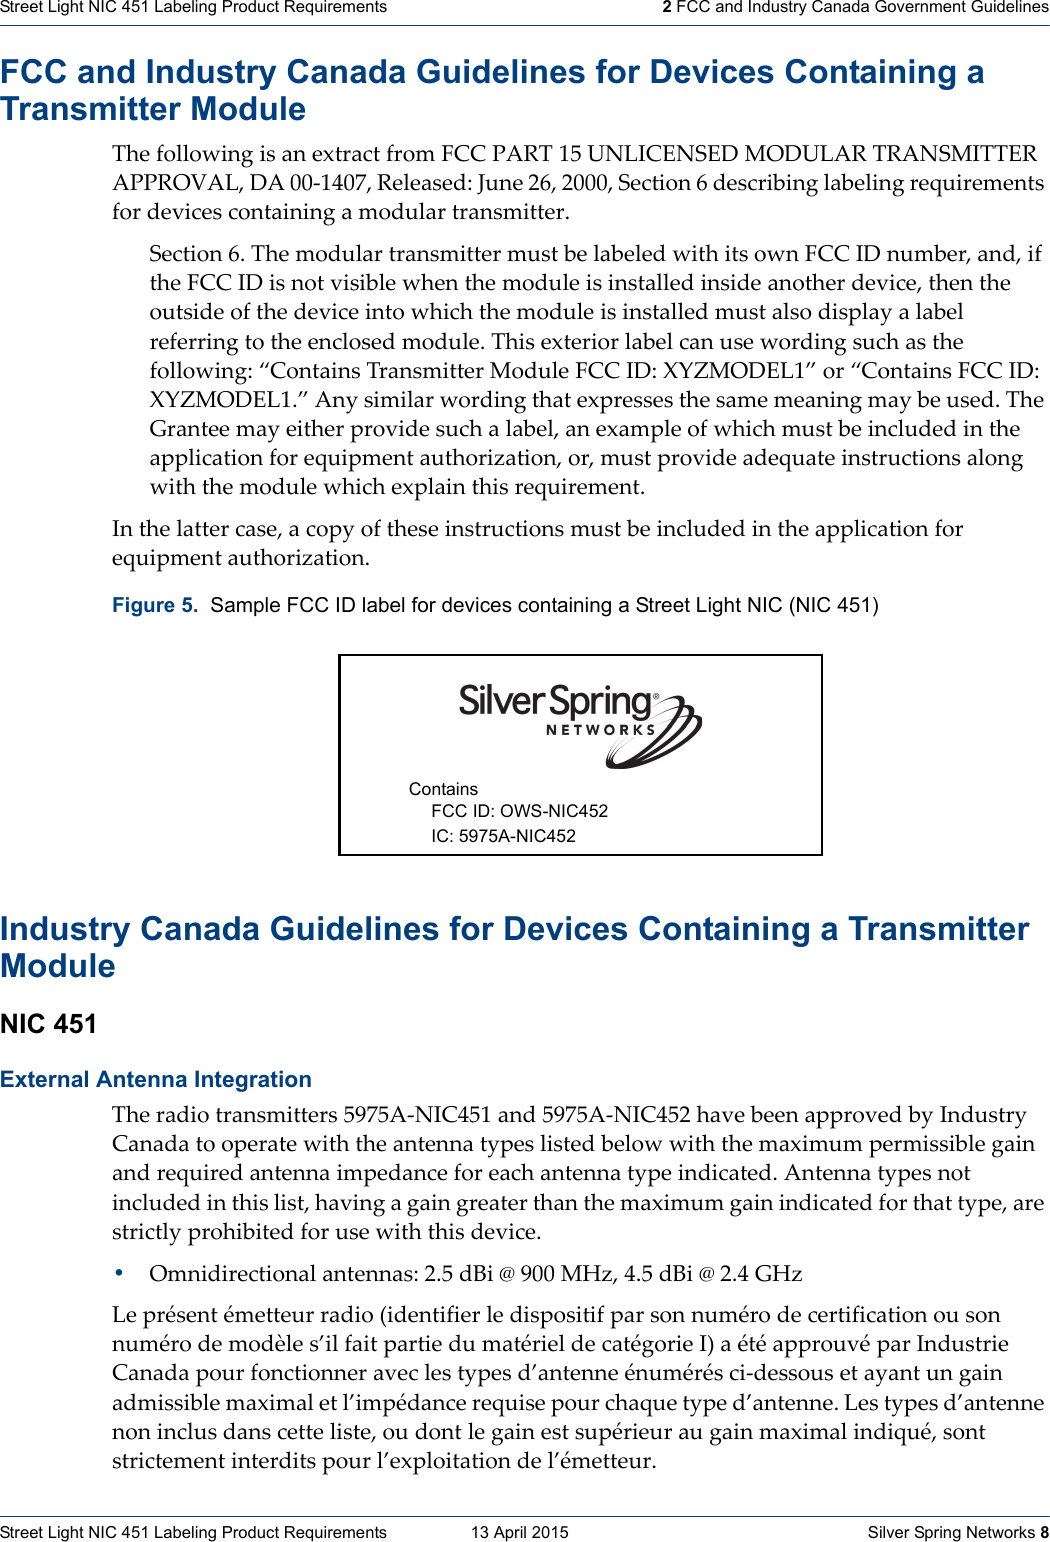 Street Light NIC 451 Labeling Product Requirements   13 April 2015    Silver Spring Networks 8Street Light NIC 451 Labeling Product Requirements   2 FCC and Industry Canada Government GuidelinesFCC and Industry Canada Guidelines for Devices Containing a Transmitter Module ThefollowingisanextractfromFCCPART15UNLICENSEDMODULARTRANSMITTERAPPROVAL,DA00‐1407,Released:June26,2000,Section6describinglabelingrequirementsfordevicescontainingamodulartransmitter.Section6.ThemodulartransmittermustbelabeledwithitsownFCCIDnumber,and,iftheFCCIDisnotvisiblewhenthemoduleisinstalledinsideanotherdevice,thentheoutsideofthedeviceintowhichthemoduleisinstalledmustalsodisplayalabelreferringtotheenclosedmodule.Thisexteriorlabelcanusewordingsuchasthefollowing:“ContainsTransmitterModuleFCCID:XYZMODEL1”or“ContainsFCCID:XYZMODEL1.”Anysimilarwordingthatexpressesthesamemeaningmaybeused.TheGranteemayeitherprovidesuchalabel,anexampleofwhichmustbeincludedintheapplicationforequipmentauthorization,or,mustprovideadequateinstructionsalongwiththemodulewhichexplainthisrequirement.Inthelattercase,acopyoftheseinstructionsmustbeincludedintheapplicationforequipmentauthorization.Industry Canada Guidelines for Devices Containing a Transmitter Module NIC 451 External Antenna Integration Theradiotransmitters5975A‐NIC451and5975A‐NIC452havebeenapprovedbyIndustryCanadatooperatewiththeantennatypeslistedbelowwiththemaximumpermissiblegainandrequiredantennaimpedanceforeachantennatypeindicated.Antennatypesnotincludedinthislist,havingagaingreaterthanthemaximumgainindicatedforthattype,arestrictlyprohibitedforusewiththisdevice.•Omnidirectionalantennas:2.5dBi@900MHz,4.5dBi@2.4GHzLeprésentémetteurradio(identifierledispositifparsonnumérodecertificationousonnumérodemodèles’ilfaitpartiedumatérieldecatégorieI)aétéapprouvéparIndustrieCanadapourfonctionneraveclestypesd’antenneénumérésci‐dessousetayantungainadmissiblemaximaletl’impédancerequisepourchaquetyped’antenne.Lestypesd’antennenoninclusdanscetteliste,oudontlegainestsupérieuraugainmaximalindiqué,sontstrictementinterditspourl’exploitationdel’émetteur.Figure 5.  Sample FCC ID label for devices containing a Street Light NIC (NIC 451) Contains FCC ID: OWS-NIC452 IC: 5975A-NIC452